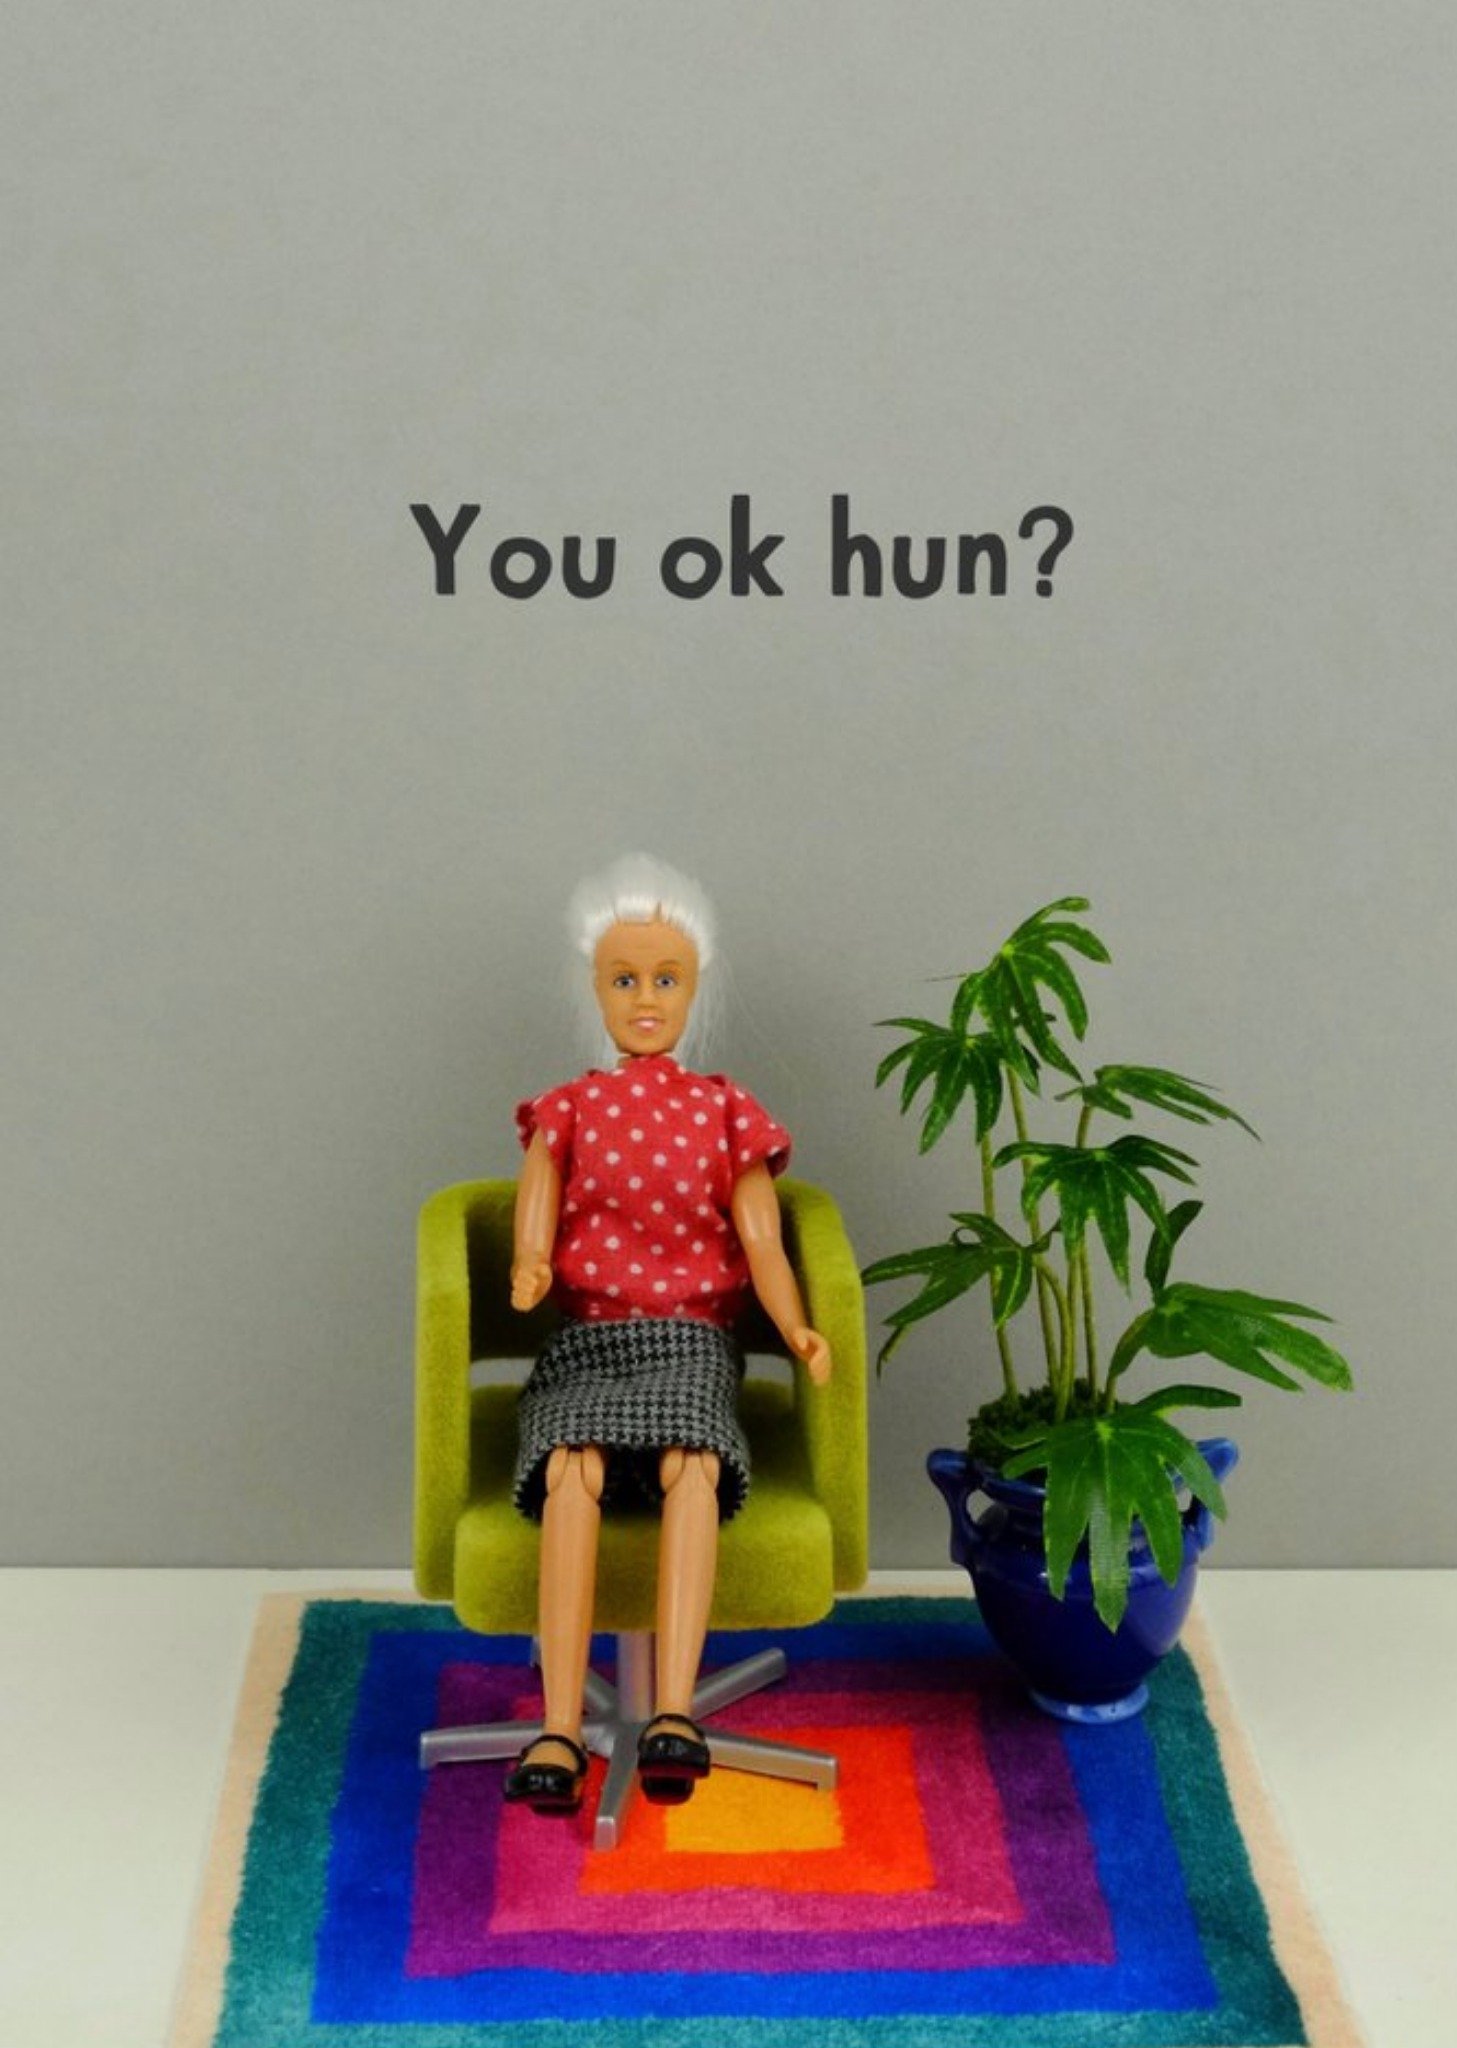 Bold And Bright Funny Photographic Image Of A Doll Sat On A Sofa You Ok Hun Card, Large